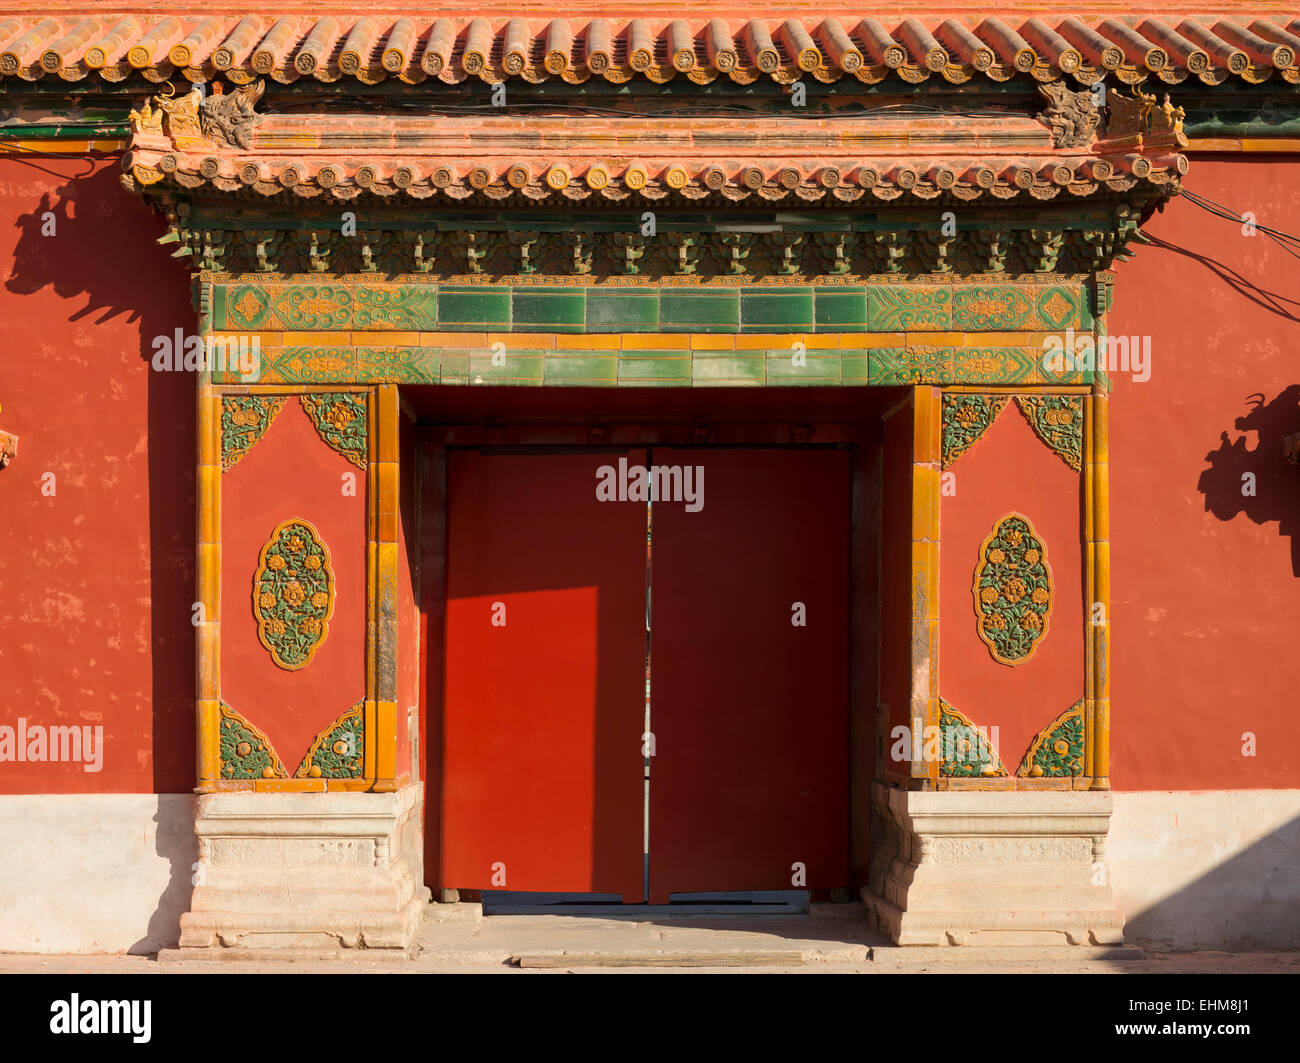 Arch / archway / internal gate / gateway / porch in the wall / walls of the Palace Museum. The Forbidden City, Beijing. China Stock Photo